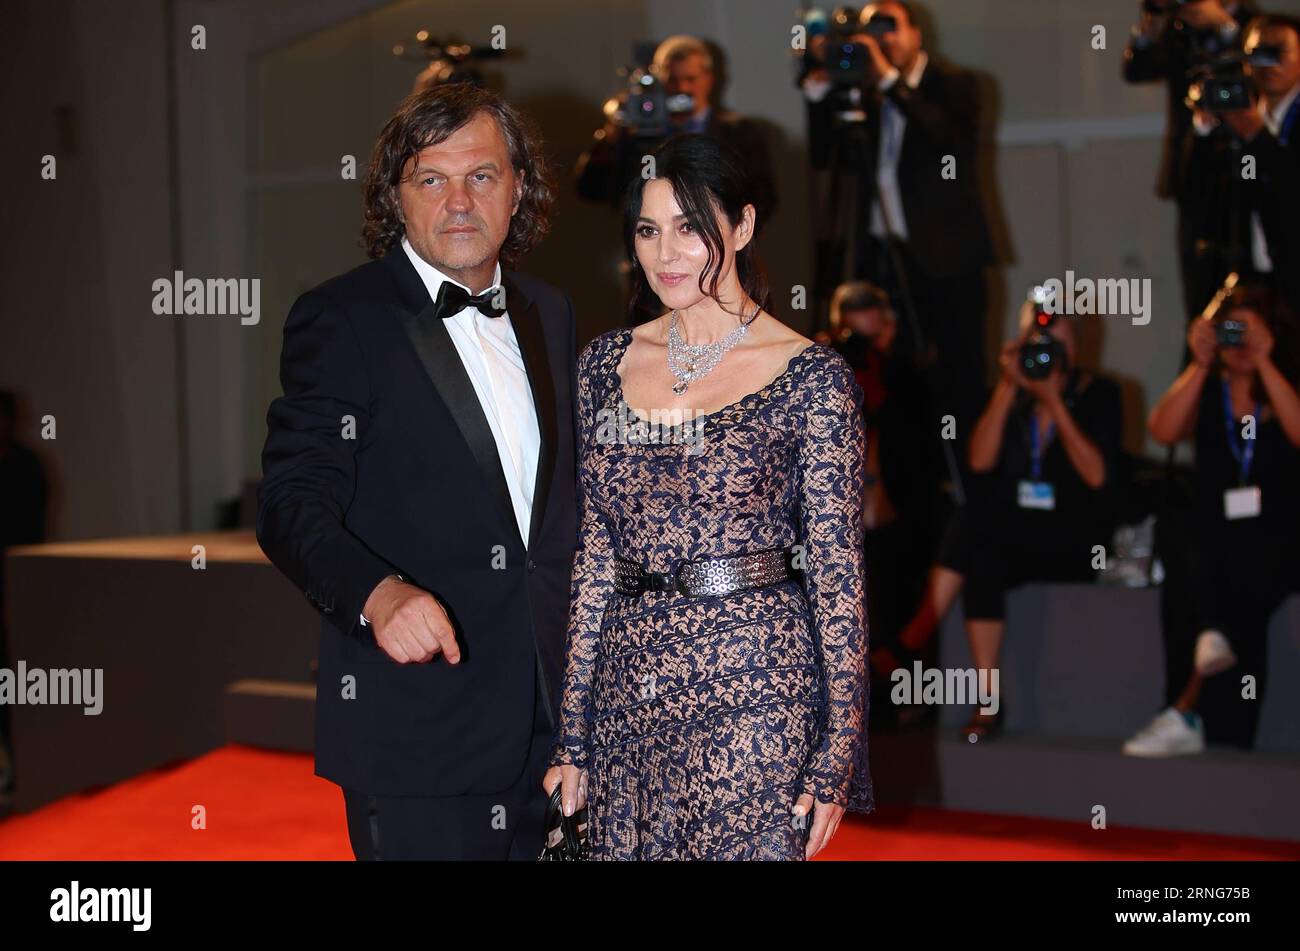 Filmfestspiele Venedig - On The Milky Road Premiere (160909) -- VENICE, Sept. 9, 2016 -- Director Emir Kusturica(L) and actress Monica Bellucci arrive for the premiere of the movie Na Mlijecnom Putu (On The Milky Road) at the 73rd Venice Film Festival in Venice, Italy, on Sept. 9, 2016. ) ITALY-VENICE-FILM FESTIVAL-ON THE MILKY ROAD JinxYu PUBLICATIONxNOTxINxCHN   Film Festival Venice ON The MILKY Road Premiere 160909 Venice Sept 9 2016 Director Emir Kusturica l and actress Monica Bellucci Arrive for The Premiere of The Movie Na  Putu ON The MILKY Road AT The 73rd Venice Film Festival in Venic Stock Photo